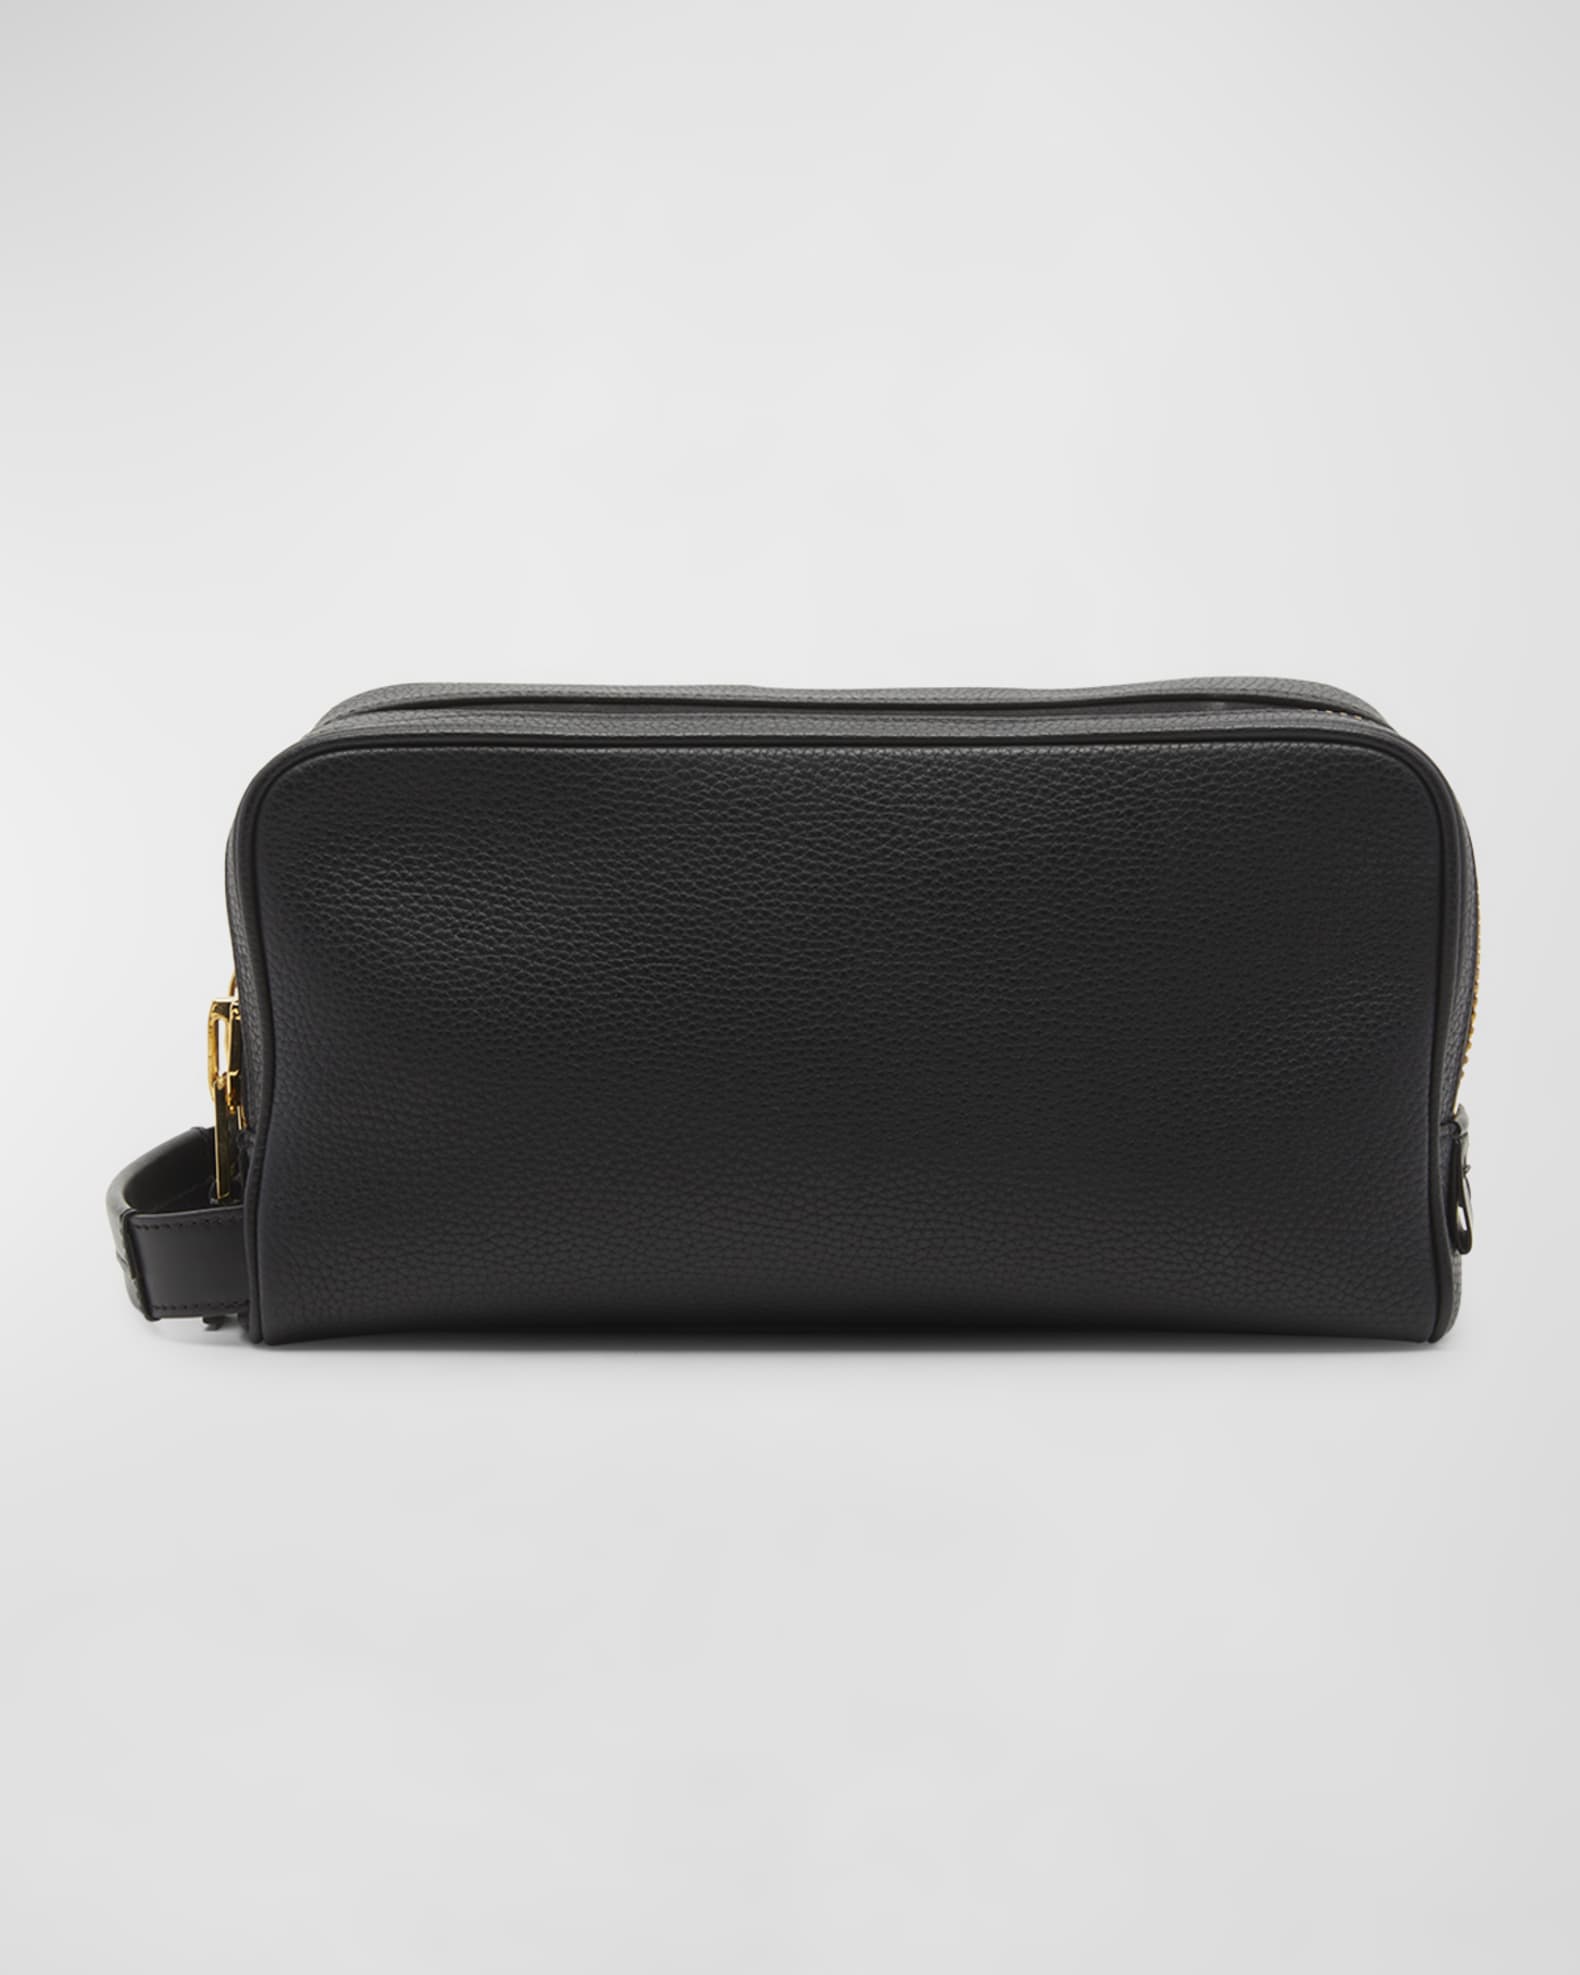 TOM FORD Men's Soft Leather Double-Zip Toiletry Bag | Neiman Marcus